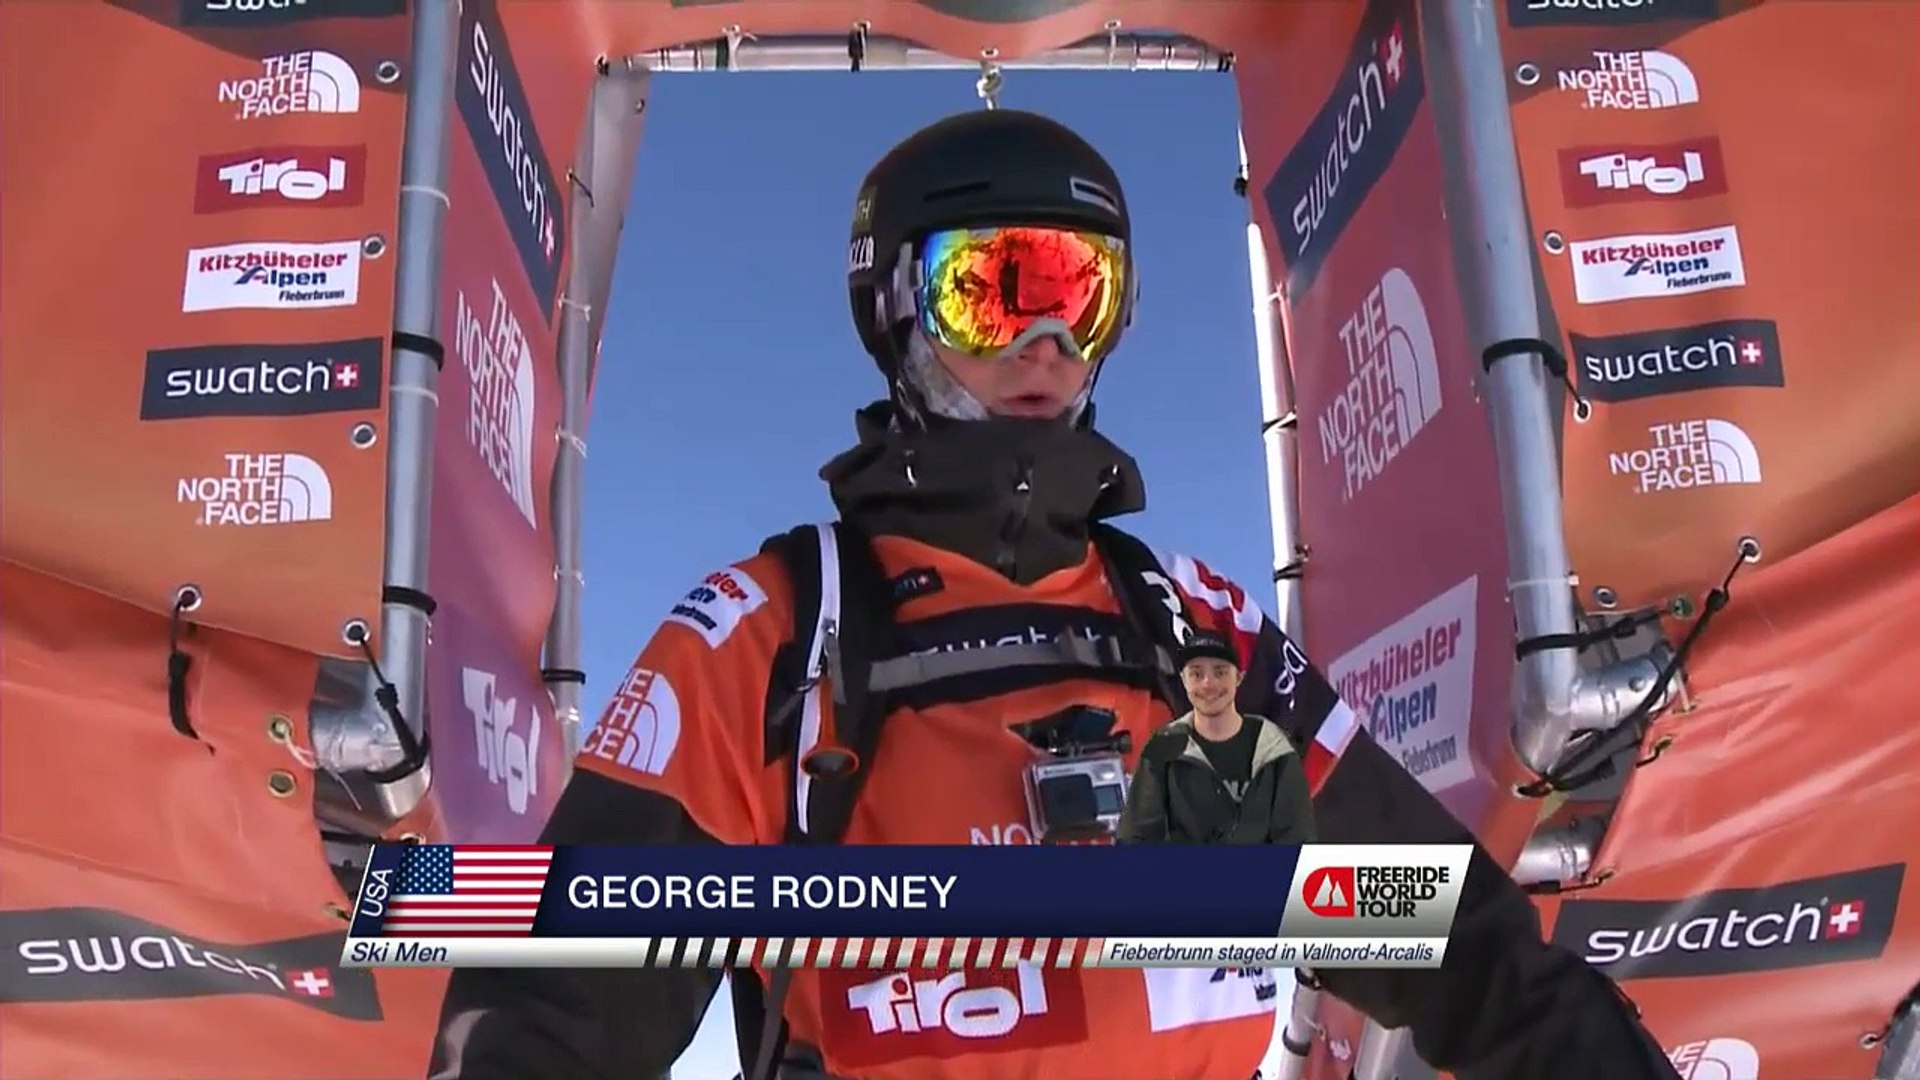 Winner Run of George Rodney (USA) Swatch Freeride World Tour 2015  Fieberbrunn By The North Face restaged in Vallnord-Arcalis AND - video  Dailymotion